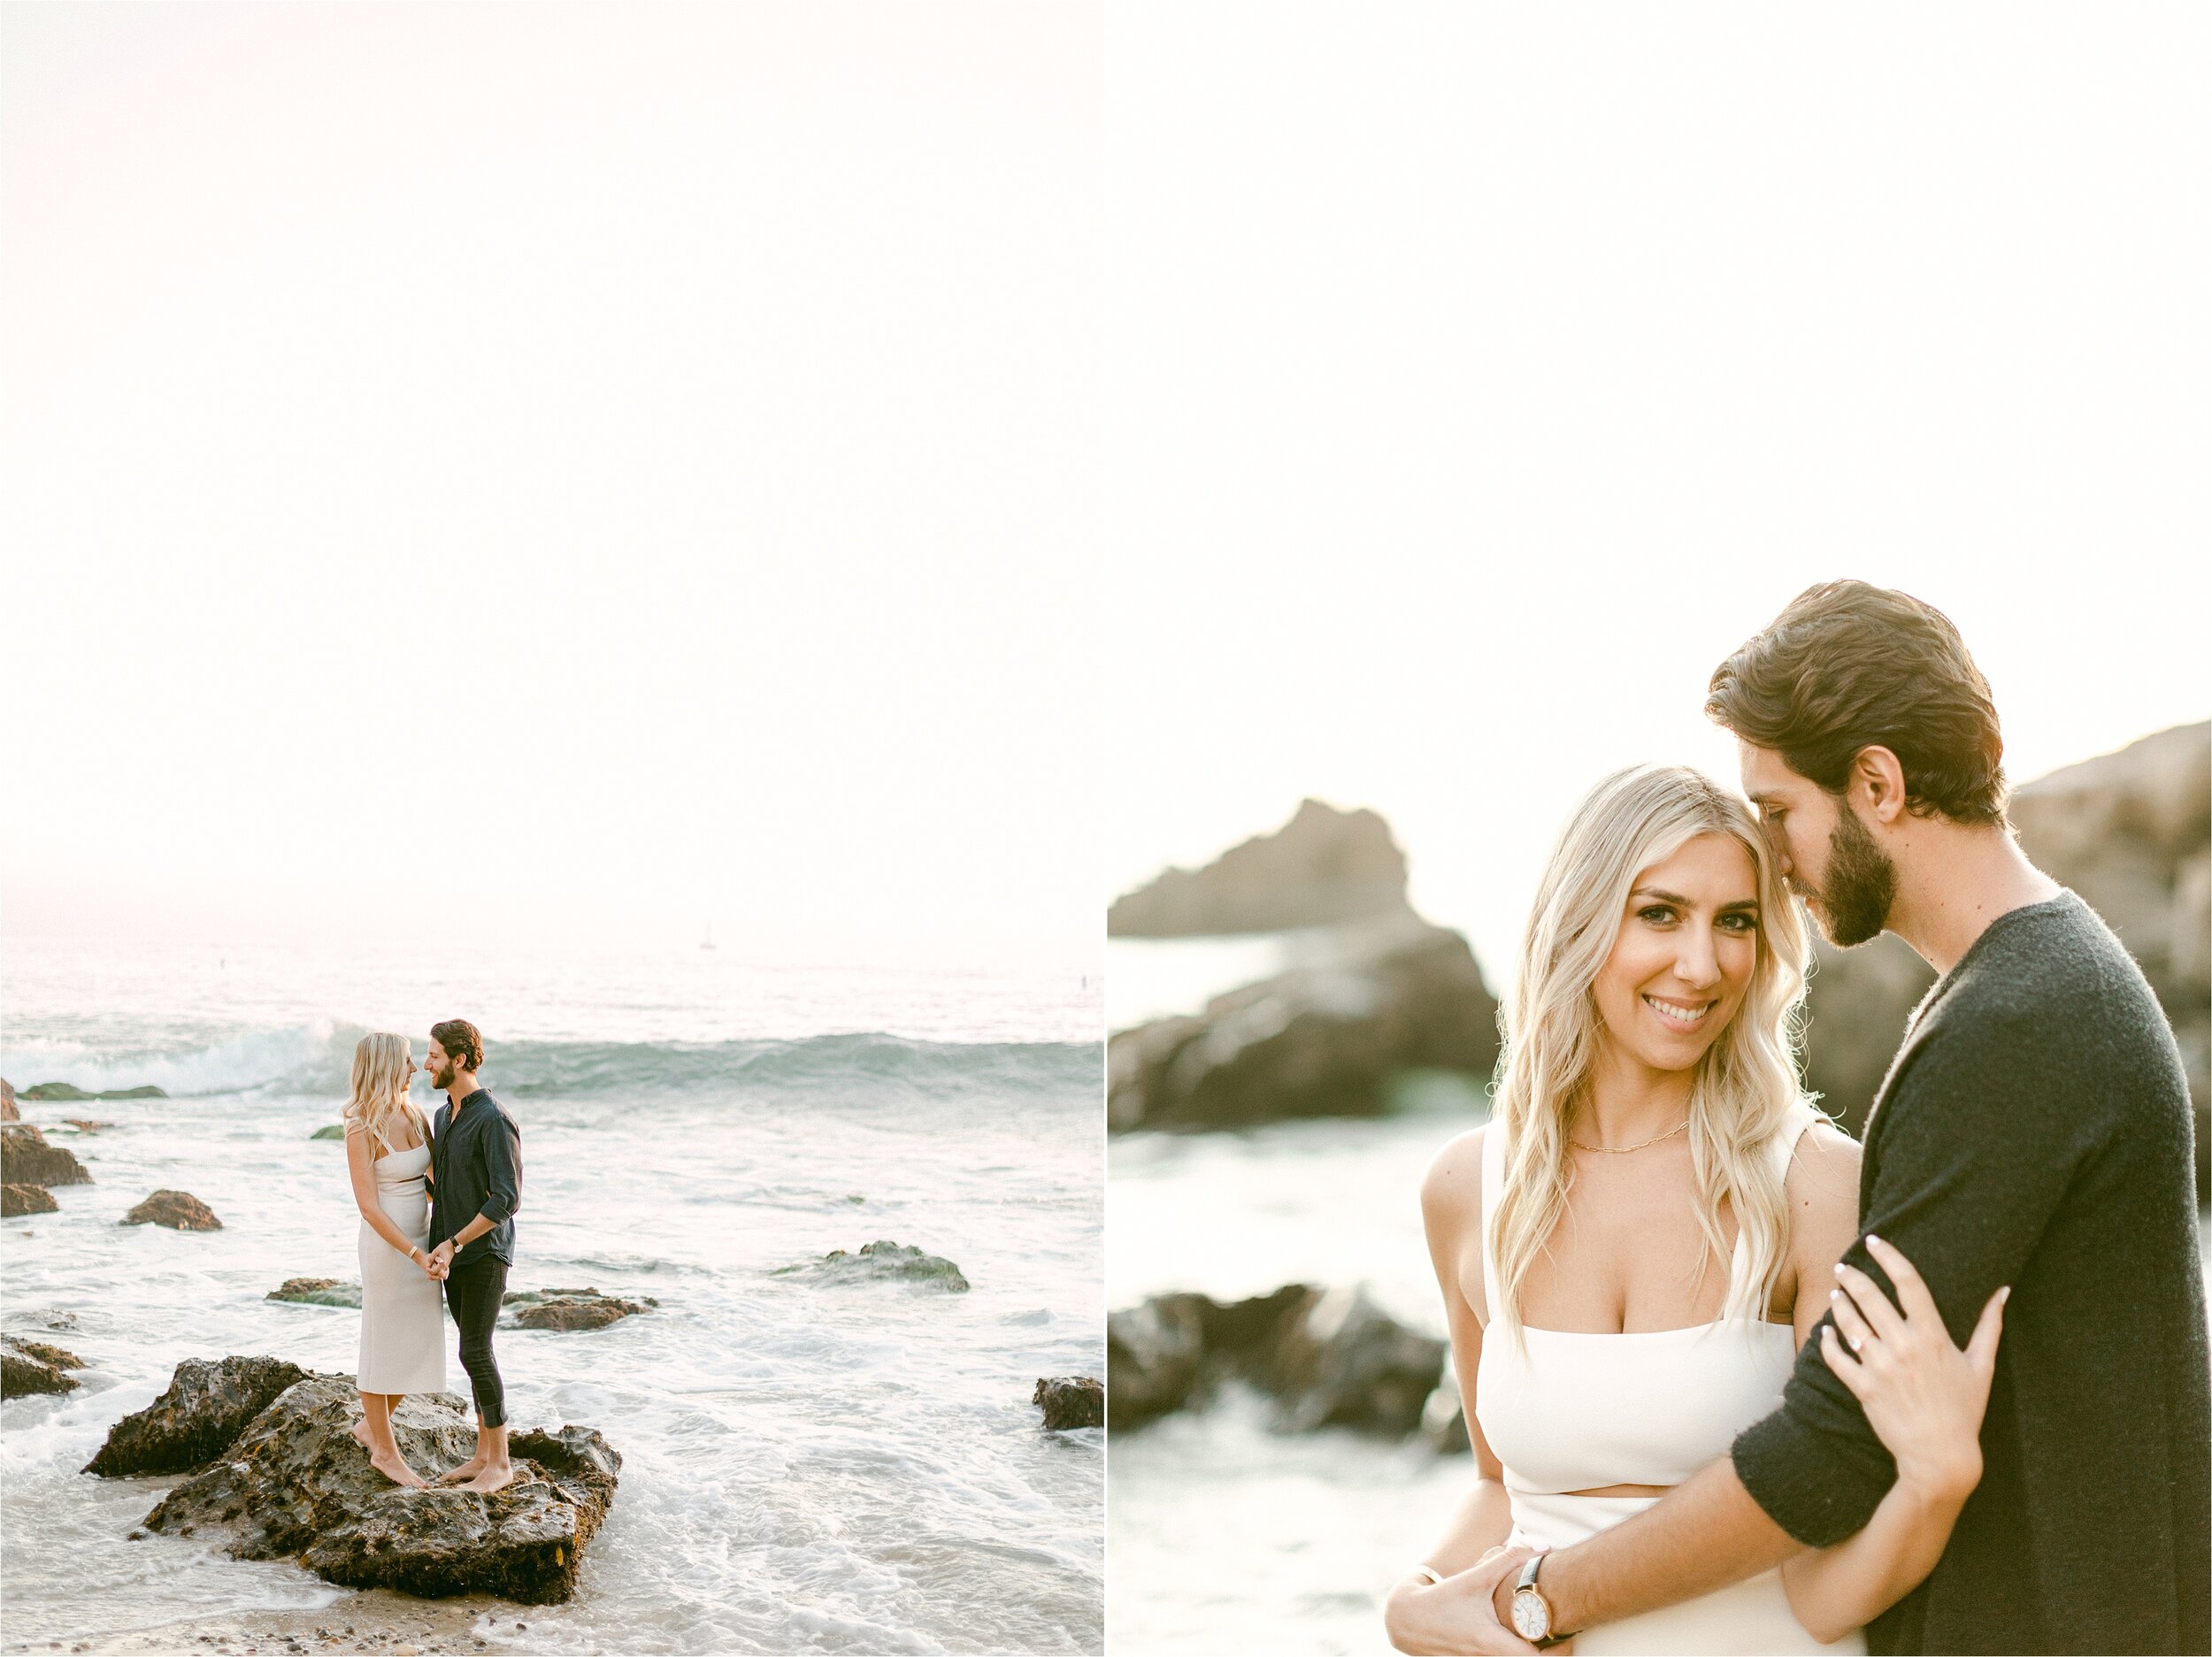 Sunset beach engagement session showcases poses for engagement photos as fiances stand on rock as the waves surround them.